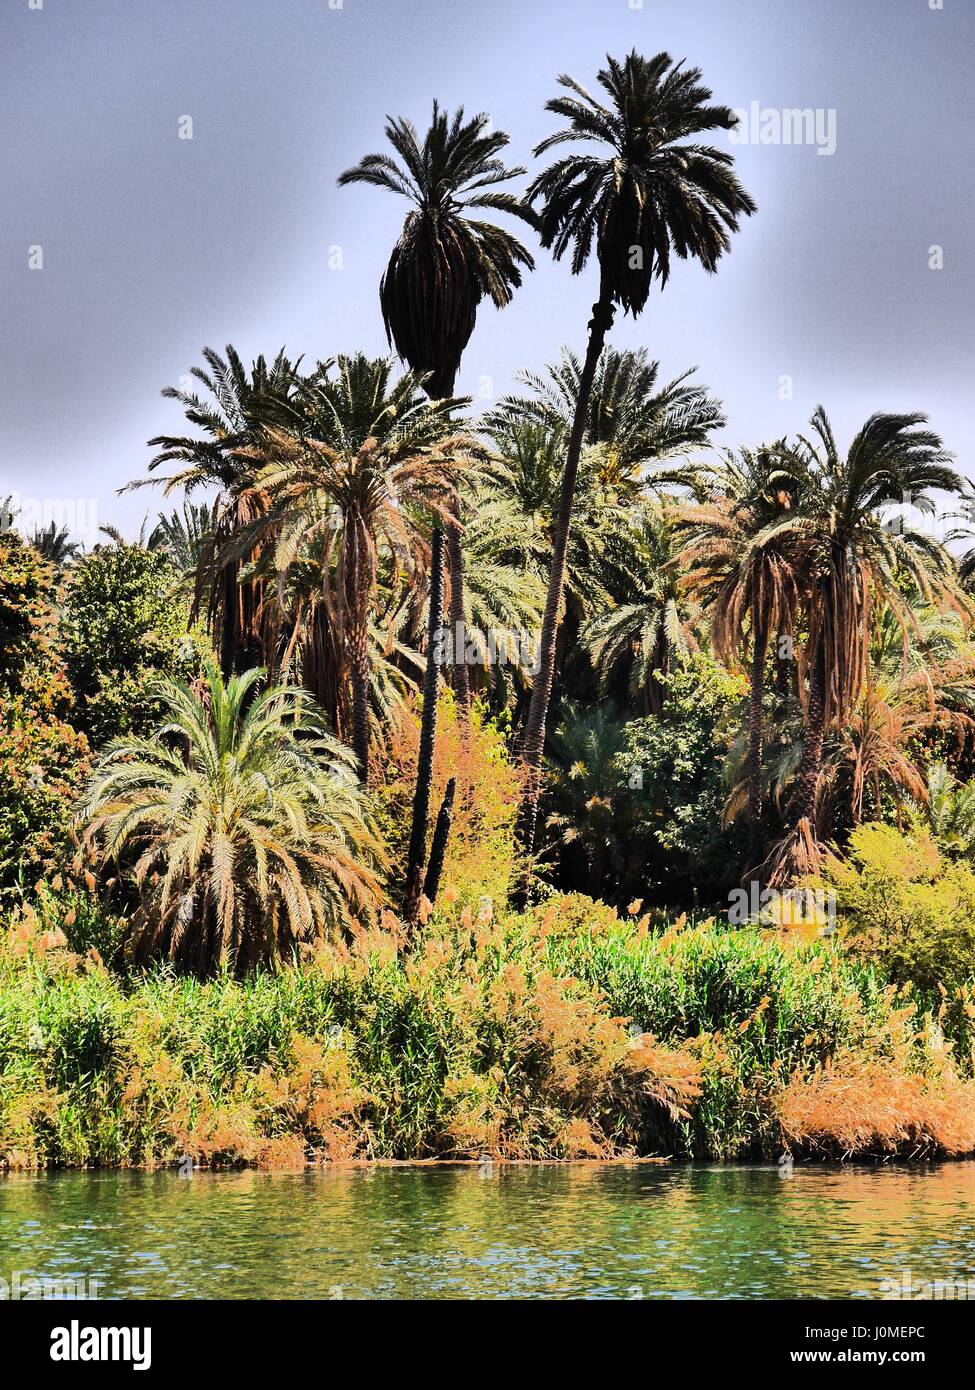 High contrast shot of lush vegetation and tall swaying palm trees on fertile banks of the River Nile, Egypt Stock Photo